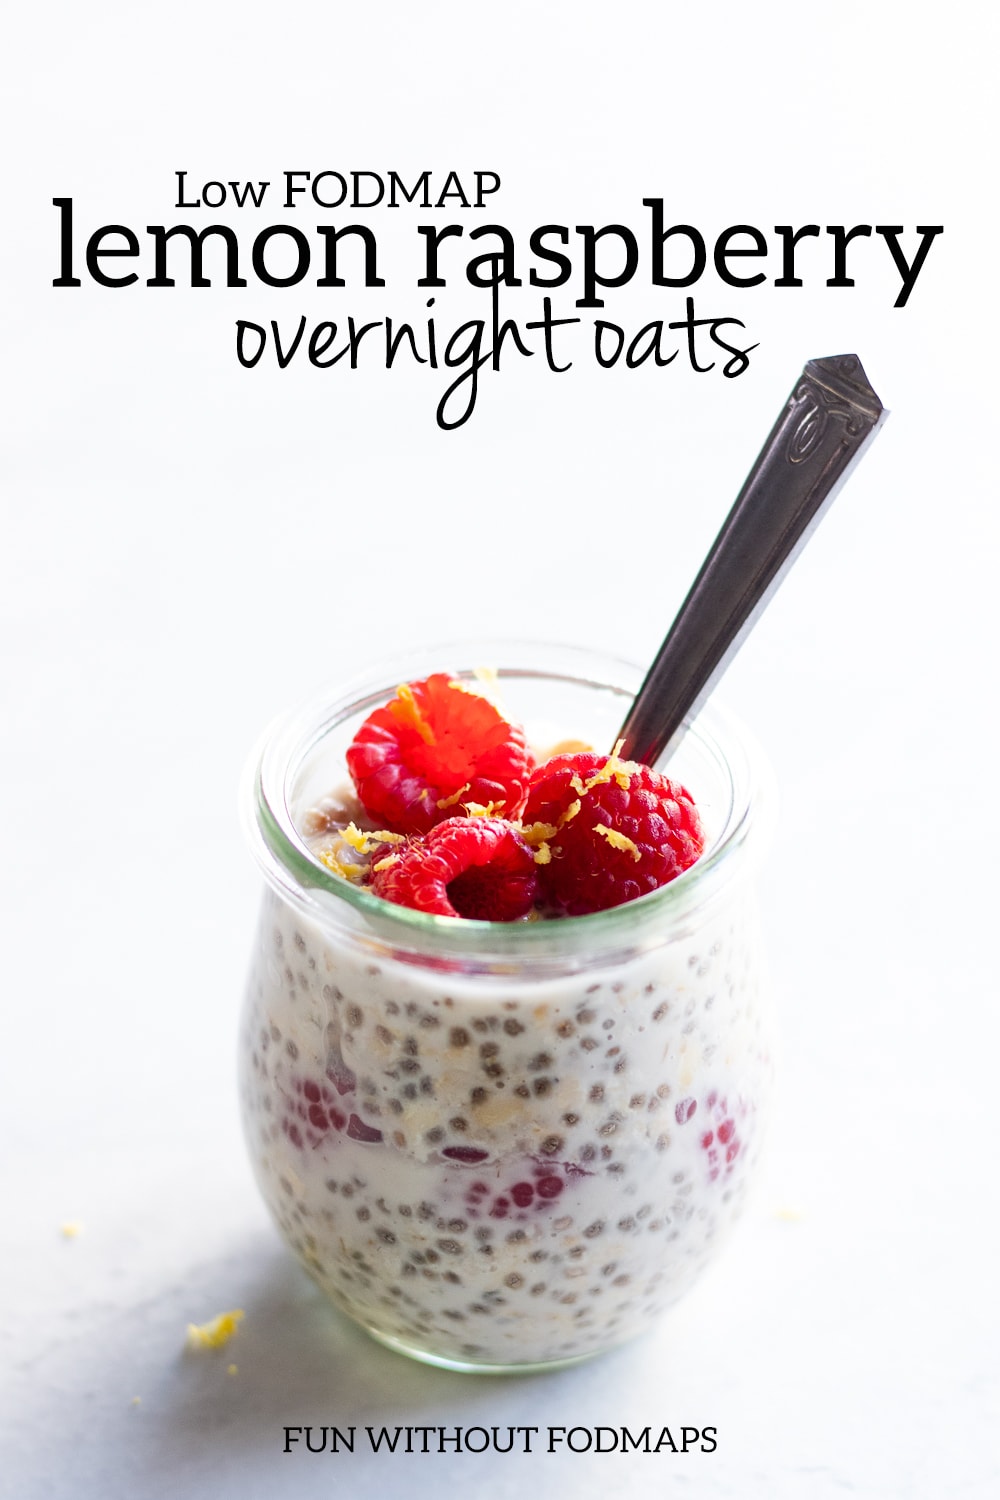 A tulip-shaped glass jar filled with overnight oats and fresh raspberries. Above, a black text overlay reads "Low FODMAP Lemon Raspberry Overnight Oats."